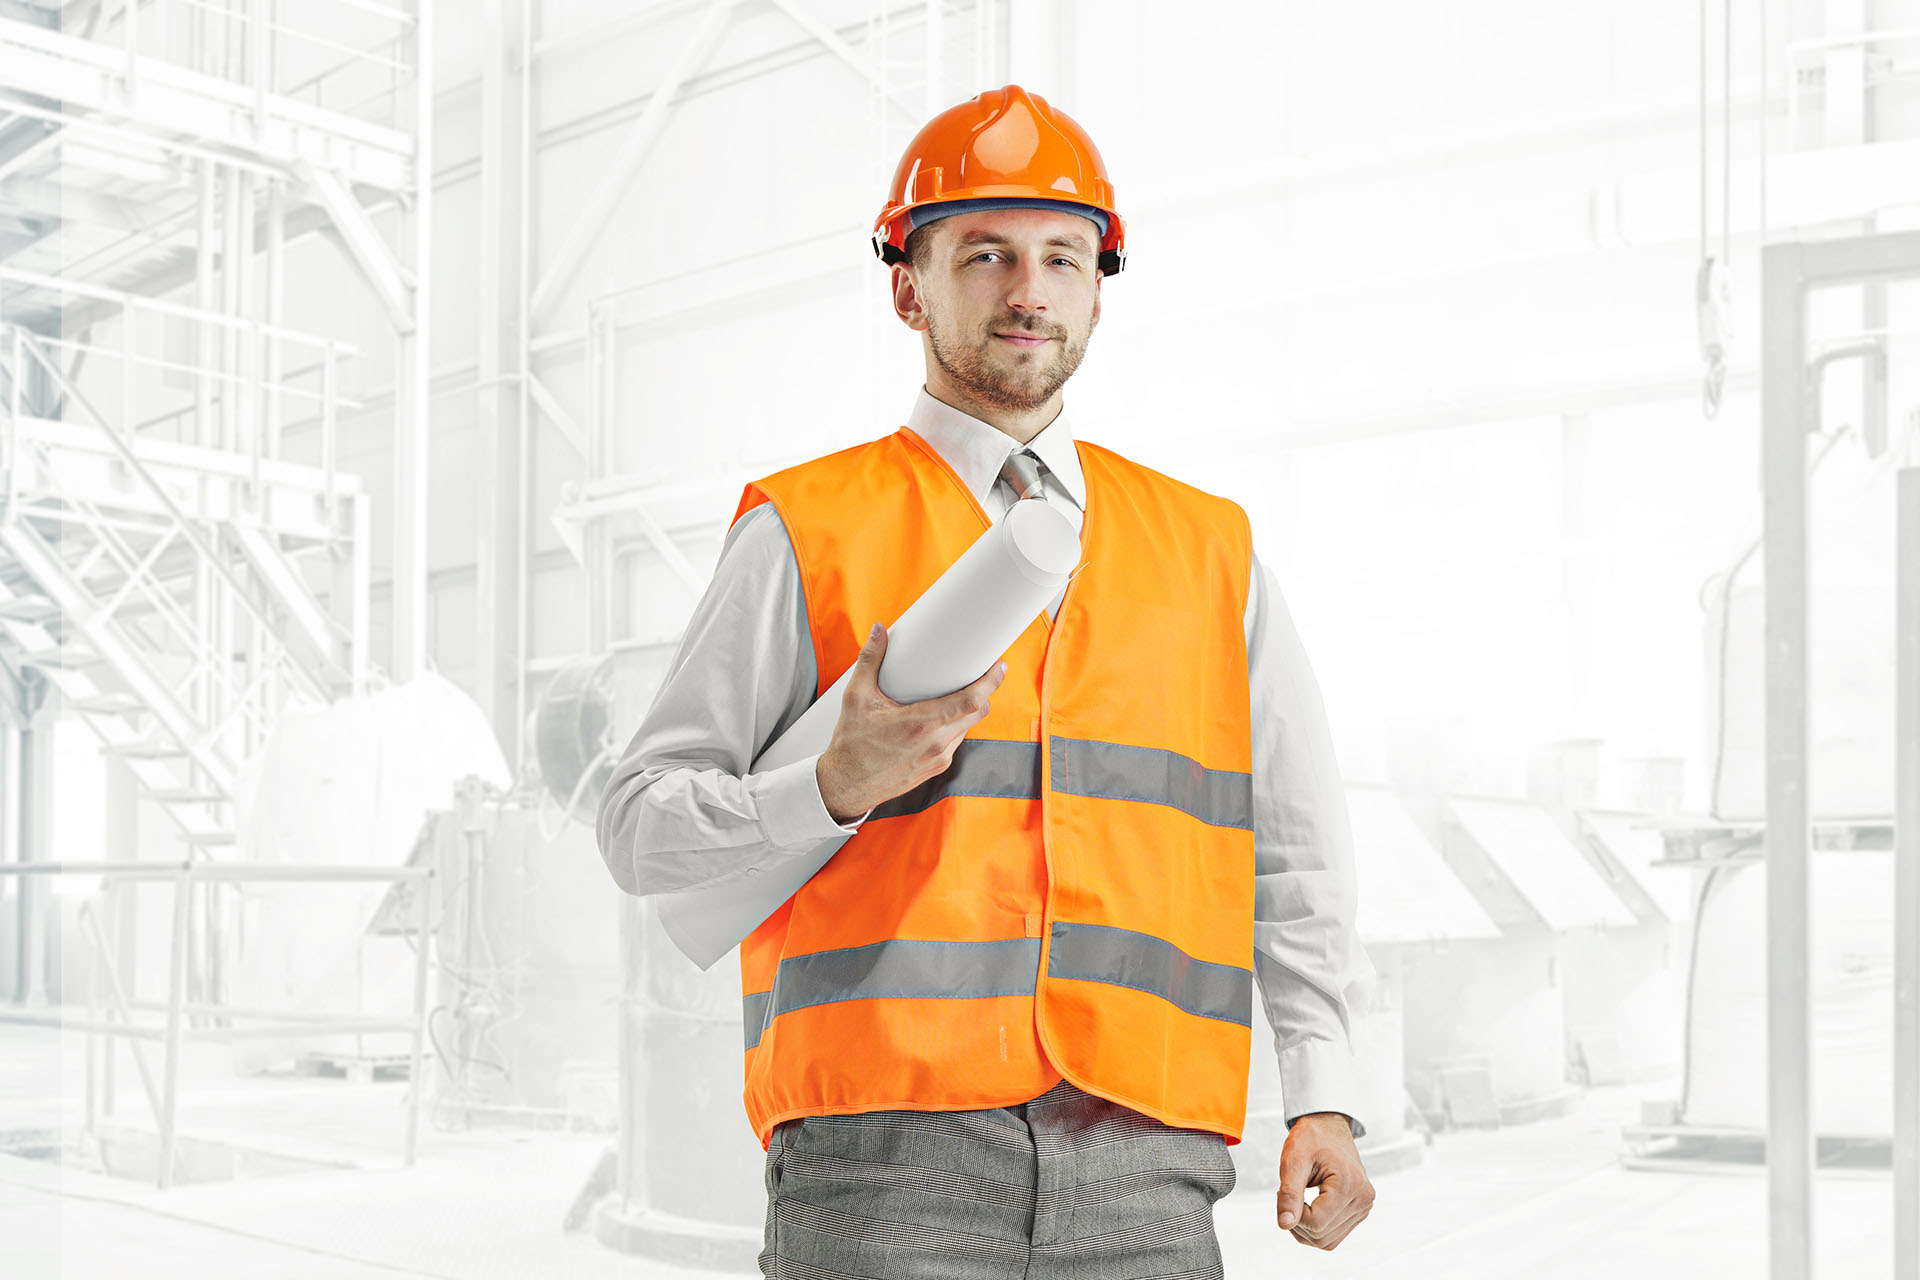 Prepare to work safely in the construction industry